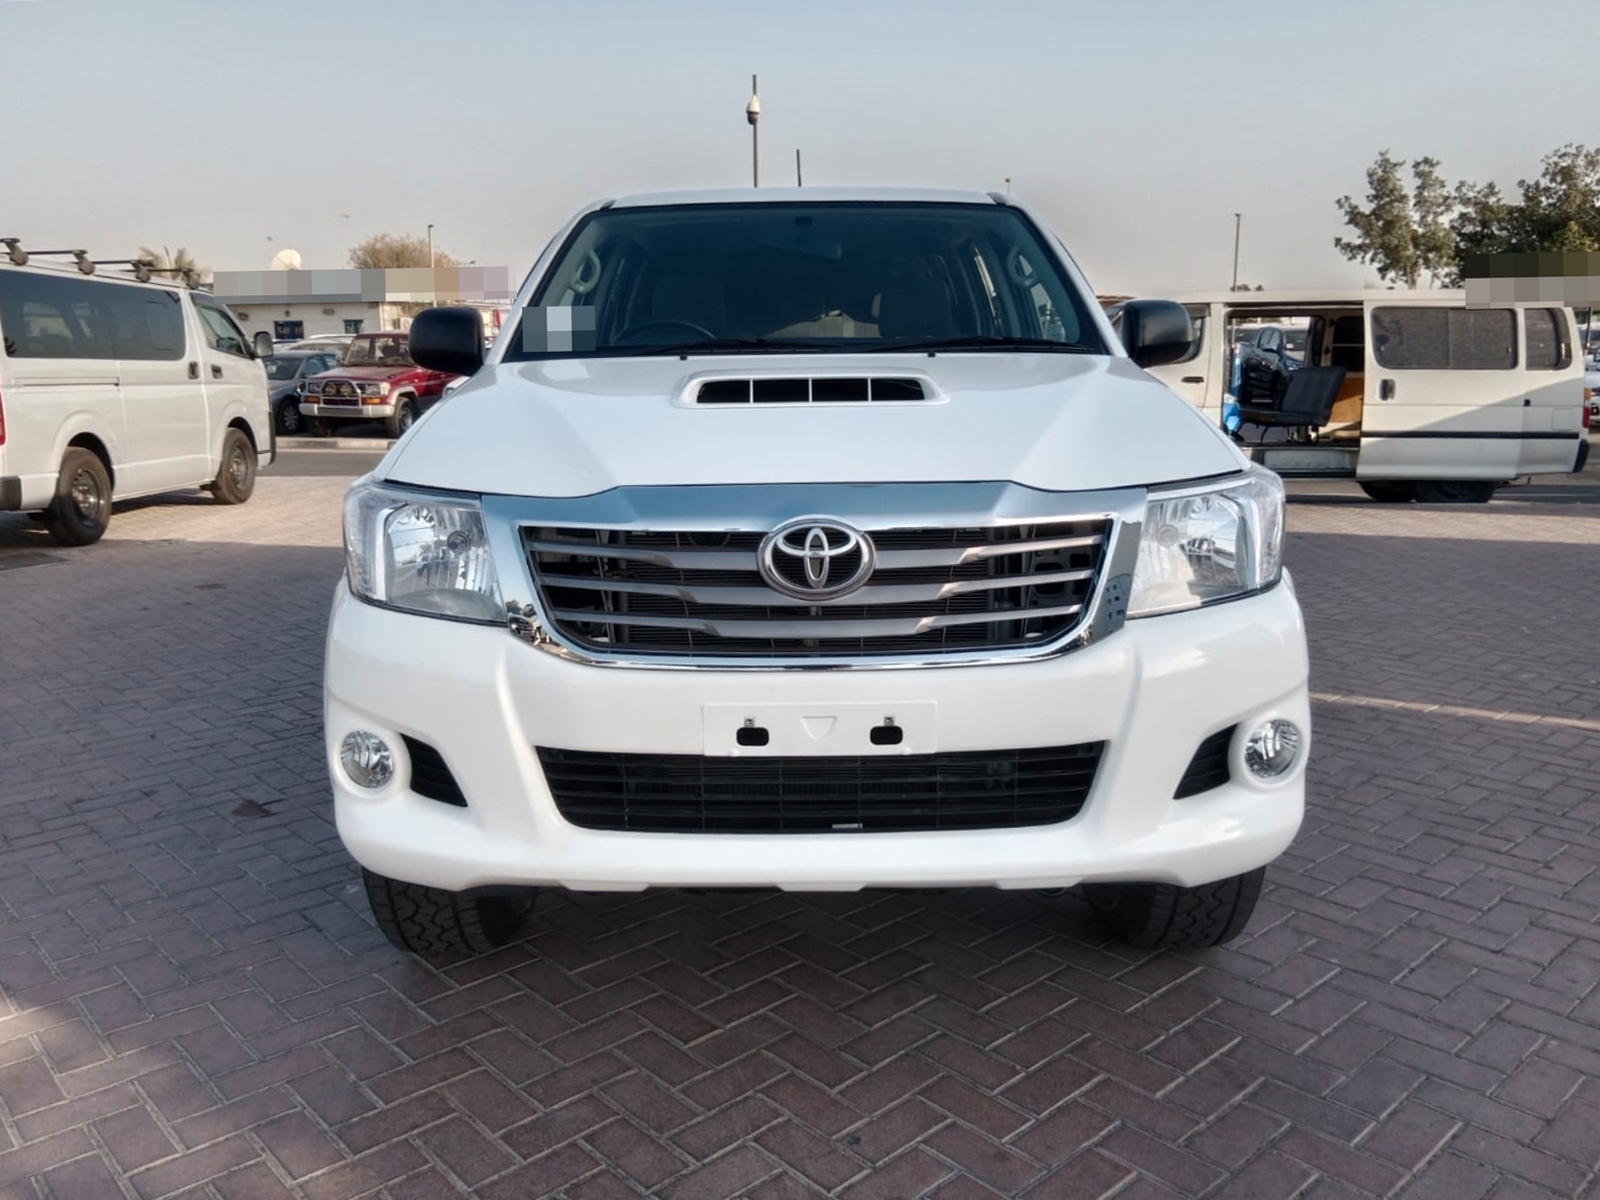 7843 TOYOTA HILUX PICK UP 3.0 M/T 4WD WHITE